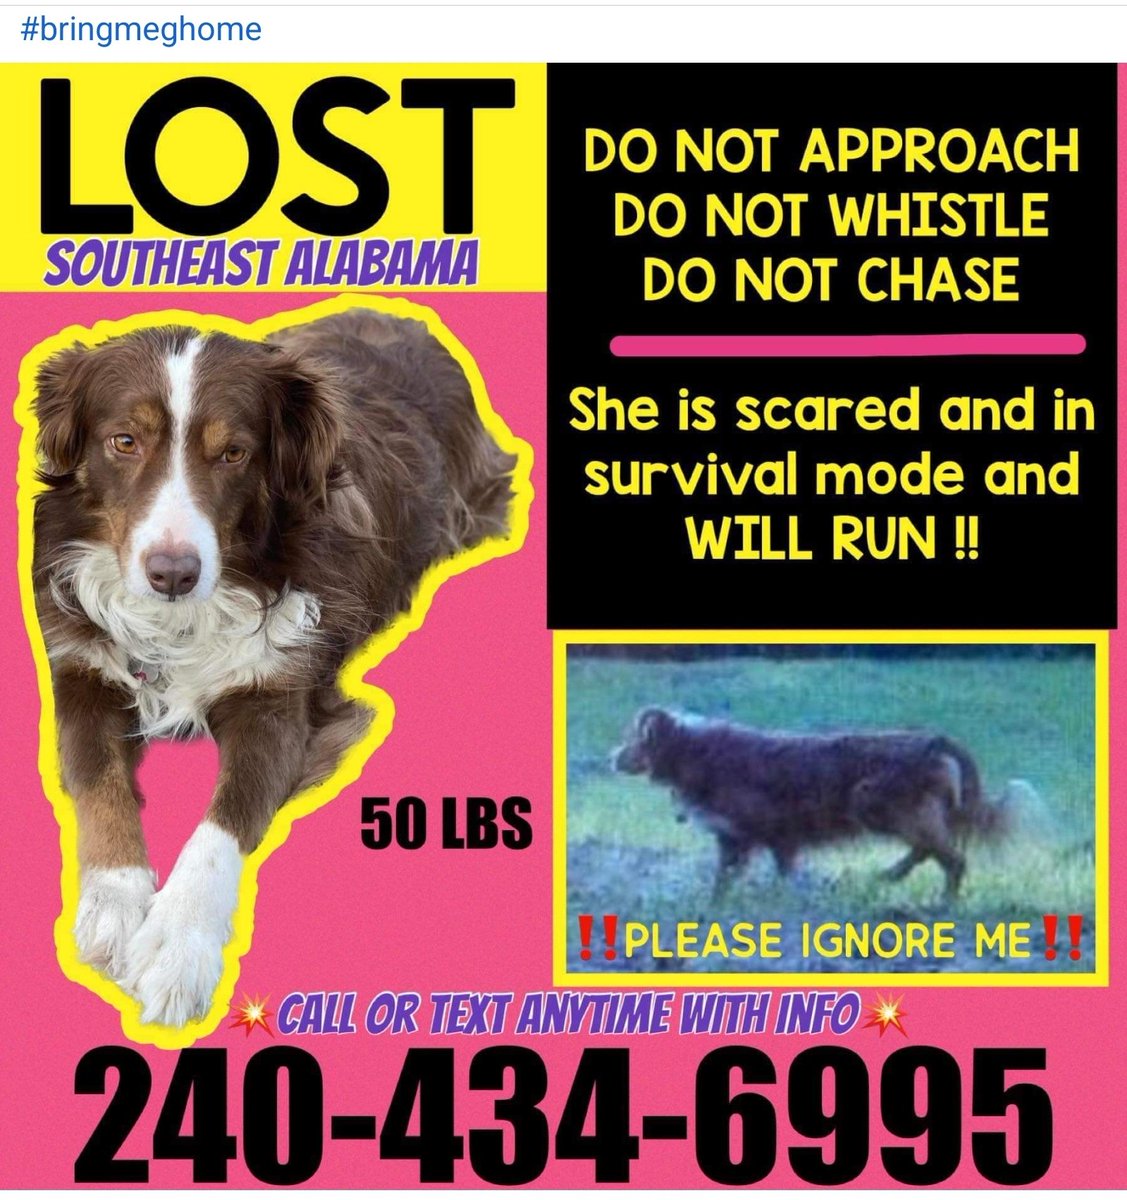 #Meg is a brown and white Australian Shepherd lost in #southeastAlabama . There is a FB page #bringmehhome Bring Meg Home with details.  Please RT #LostDog #dogsoftwitter #aussielovers #AustralianShepherd